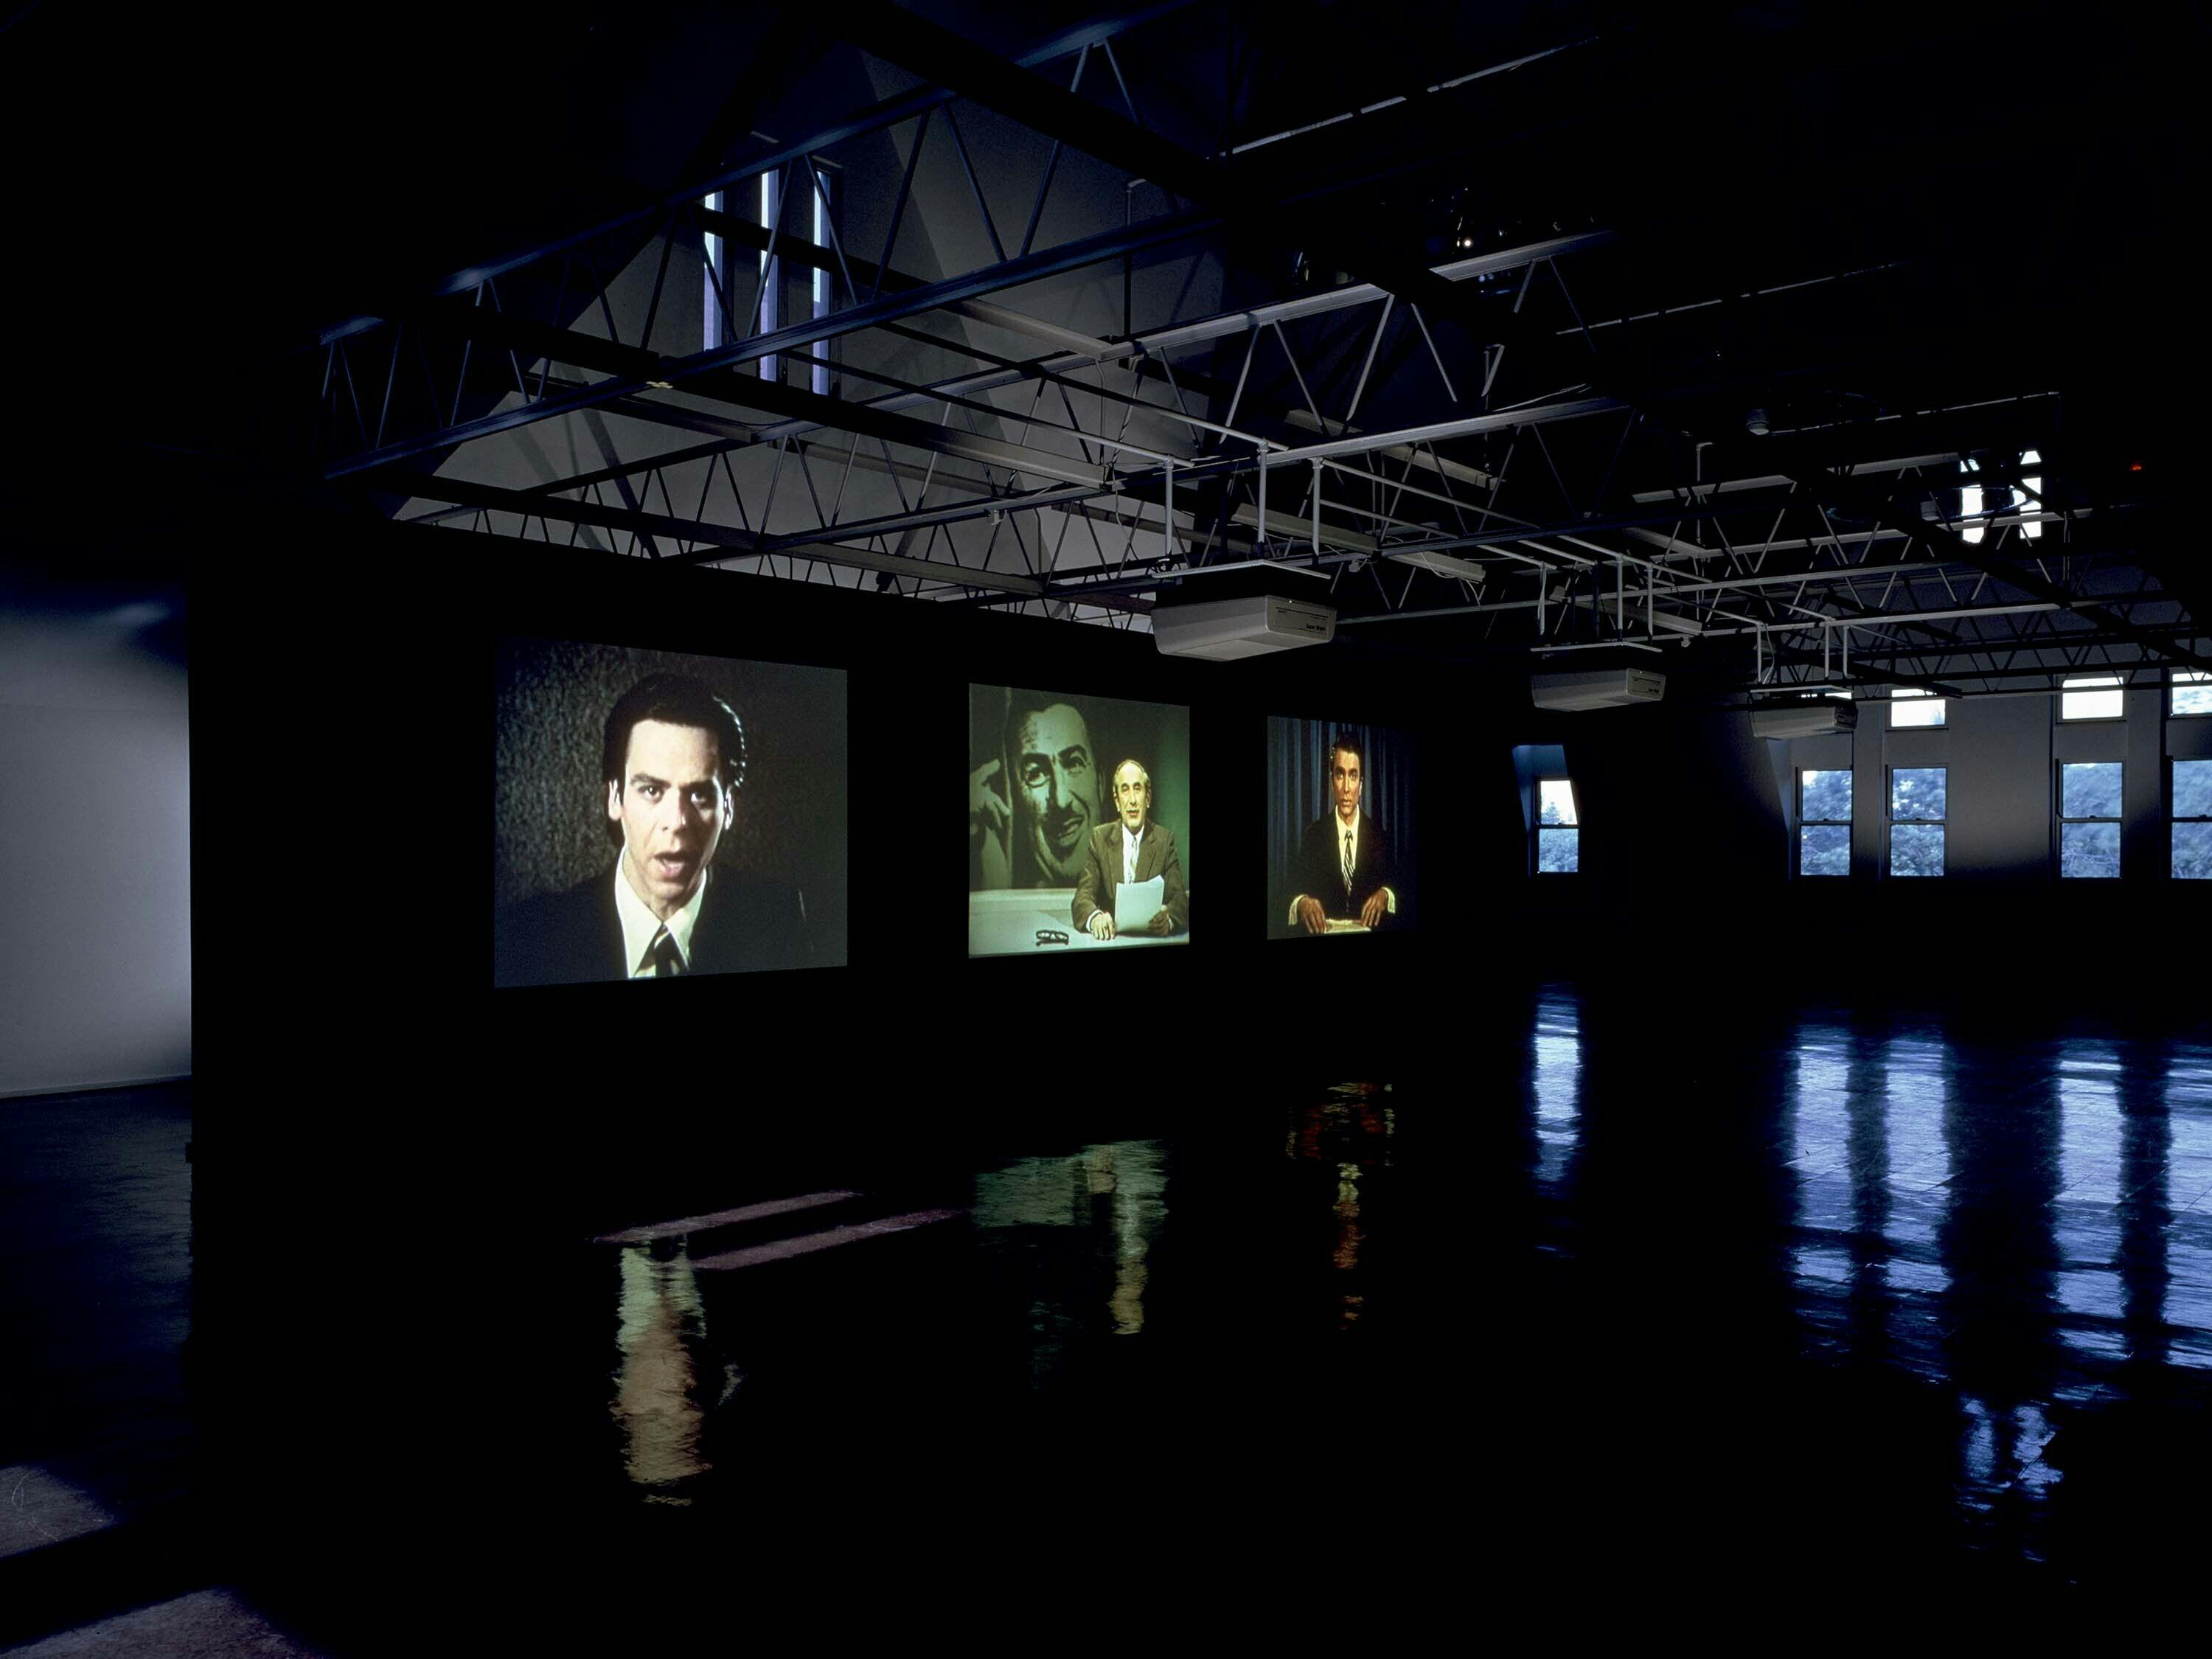 A video installation by Stan Douglas, titled Evening, dated 1994.